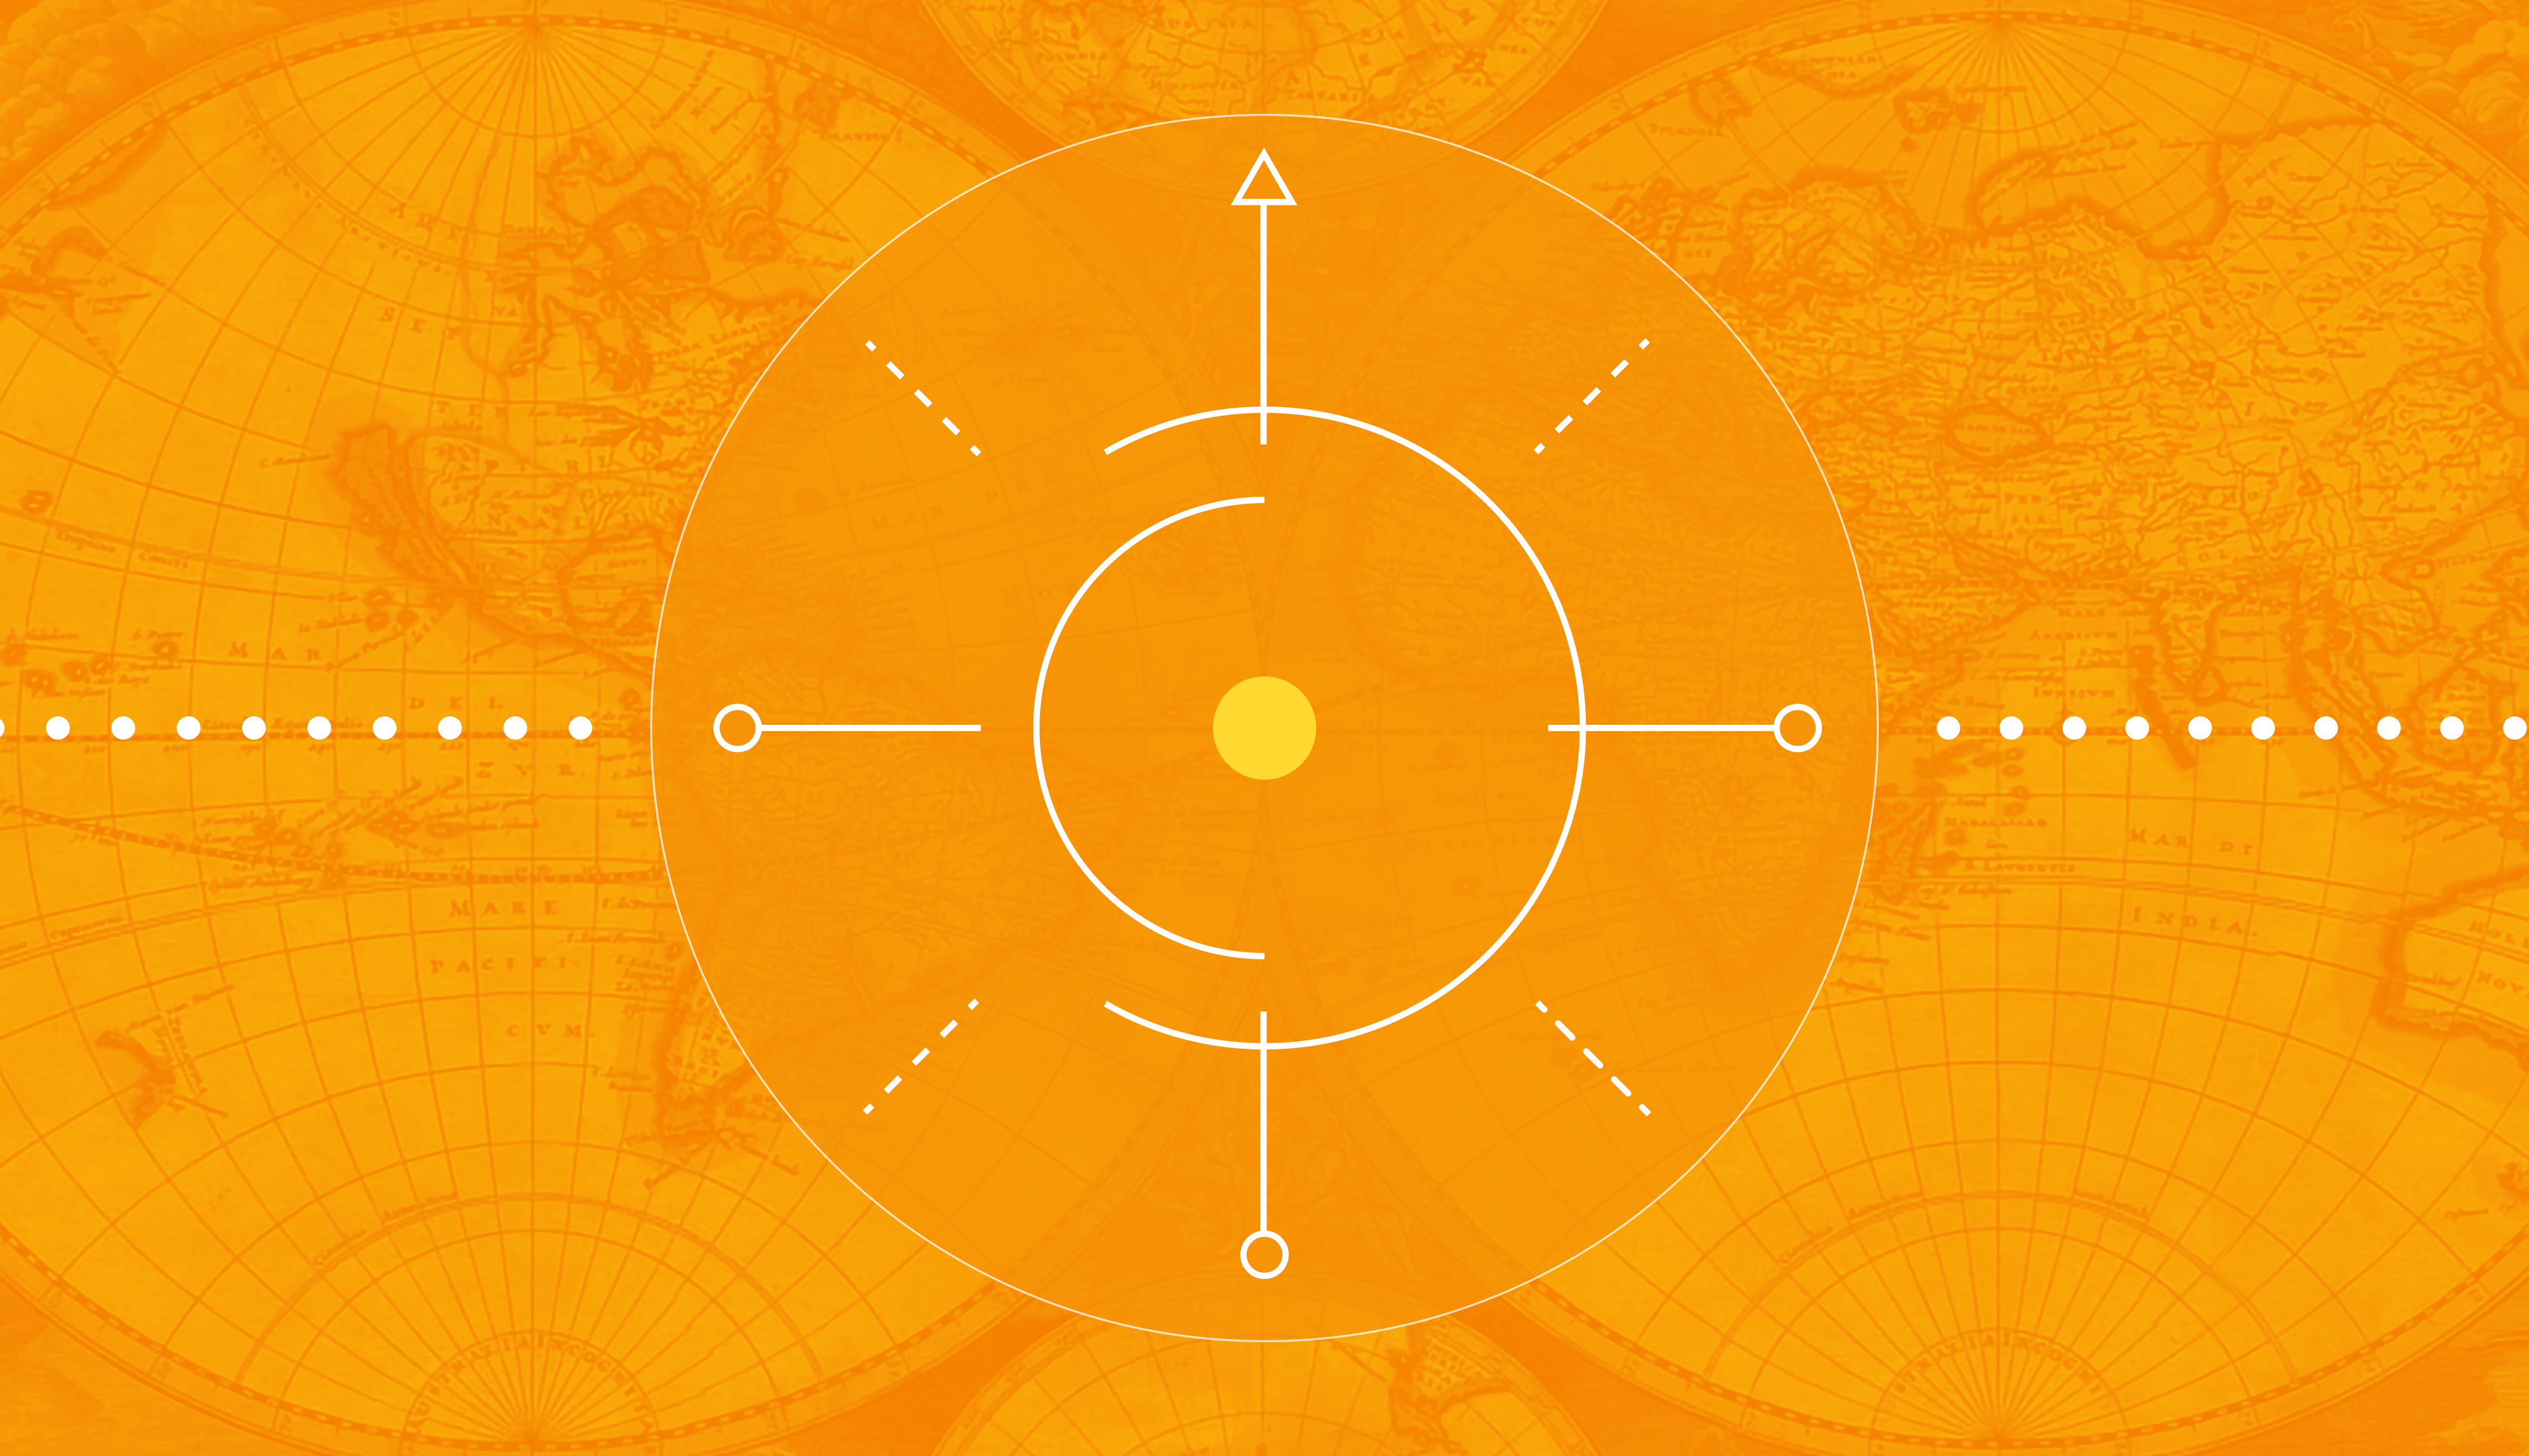 Old world map on orange background with compass-like design overlaid across the top